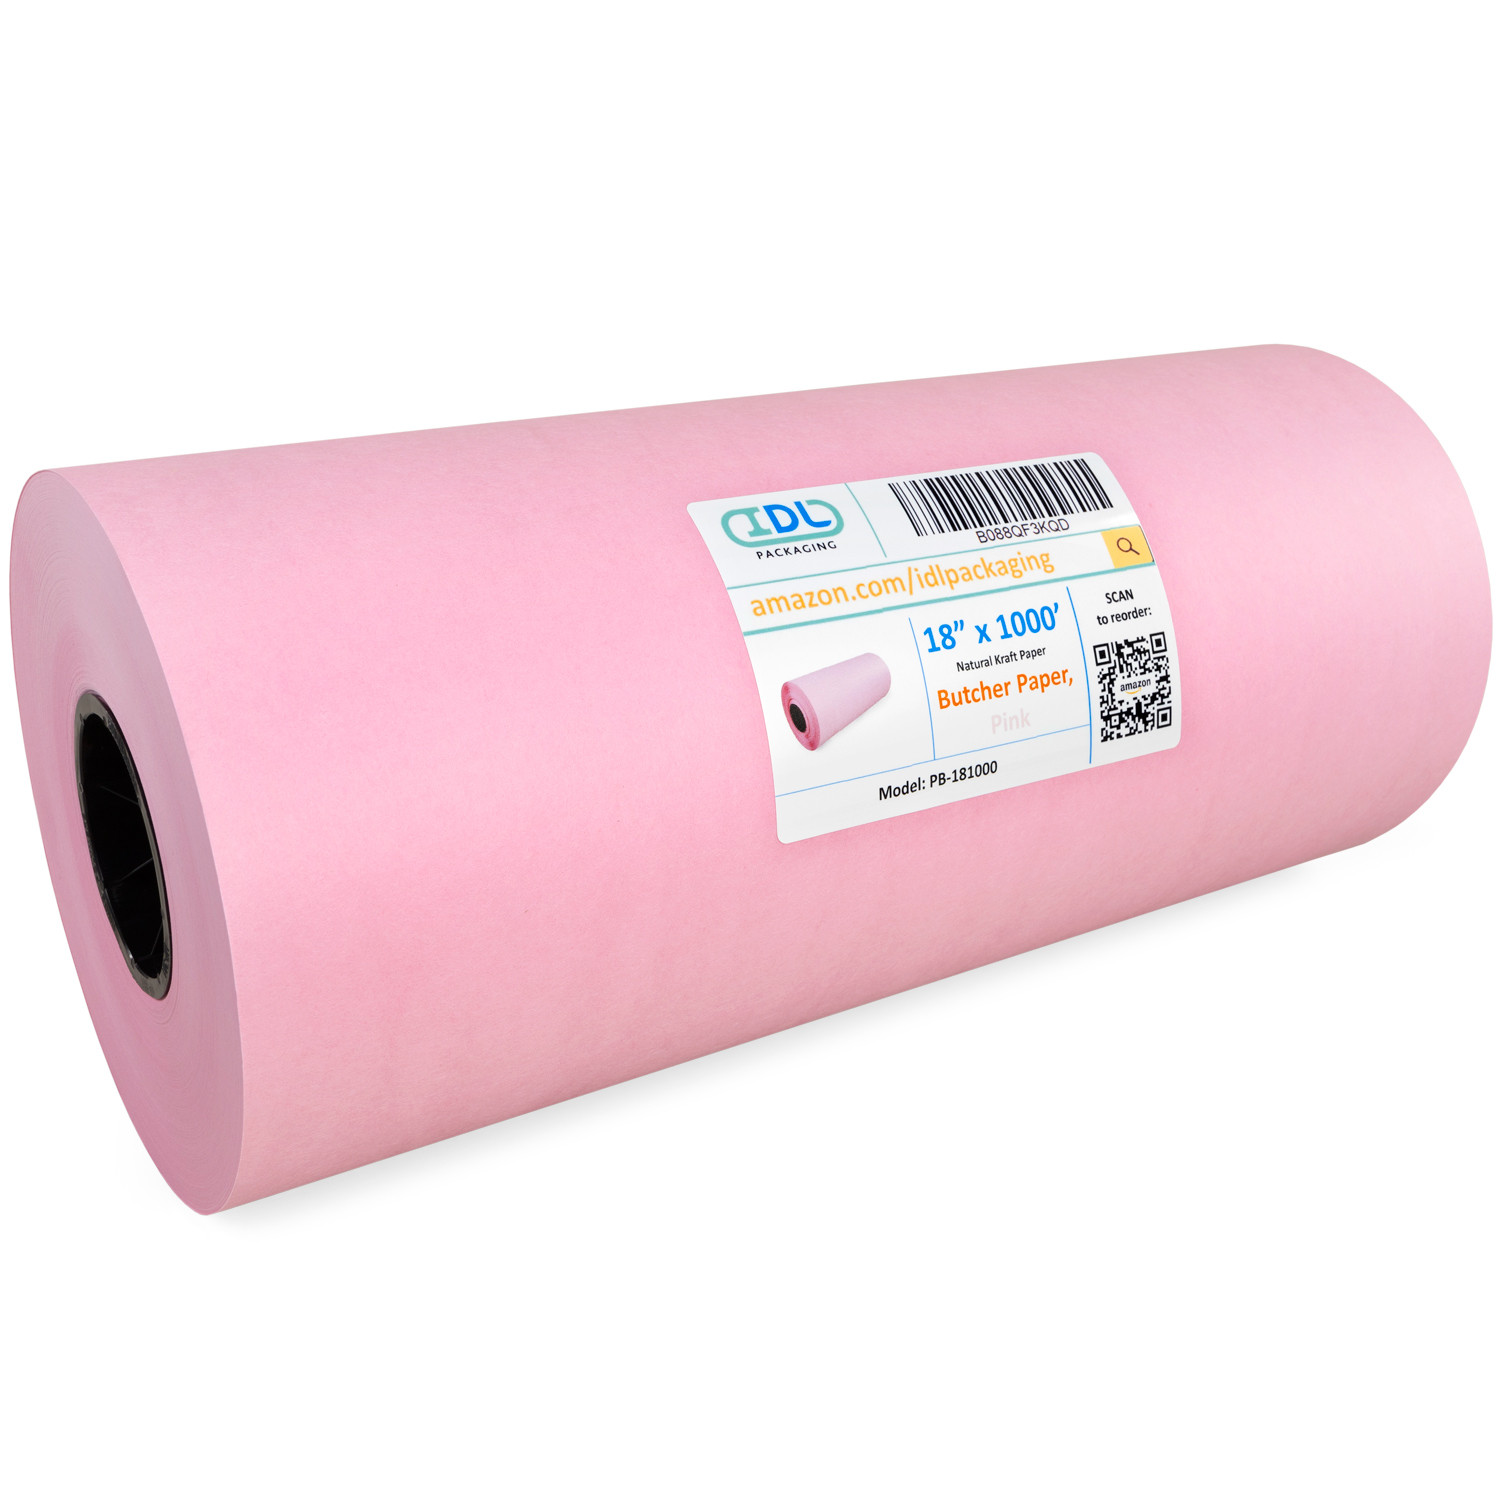 Pink Butcher Paper Roll - Case Pack of 12 Rolls - 18 Inch x 175 Feet (2100  Inch) - Food Grade Peach Wrapping Paper for Smoking Meat of all Varieties